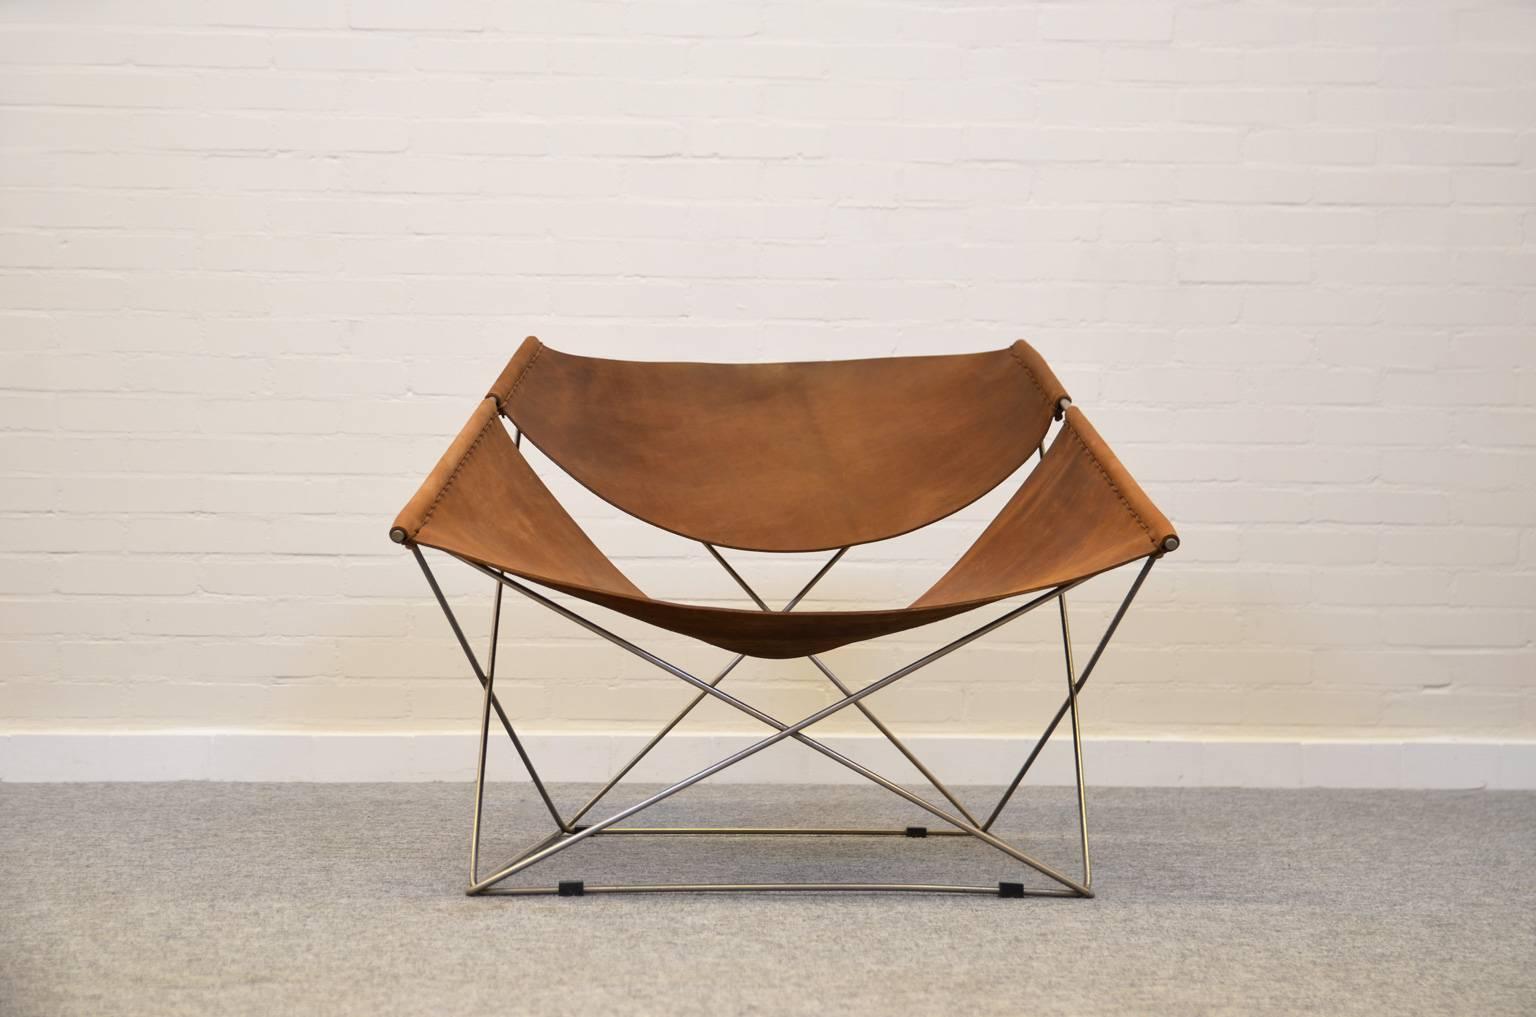 Pierre Paulin designed the butterfly chair (model F765) for the Dutch manufacturer Artifort. A clever design of two leather pieces hanging in a crossed tubular metal frame. The leather seating is renewed and the frame shows some corrosion.